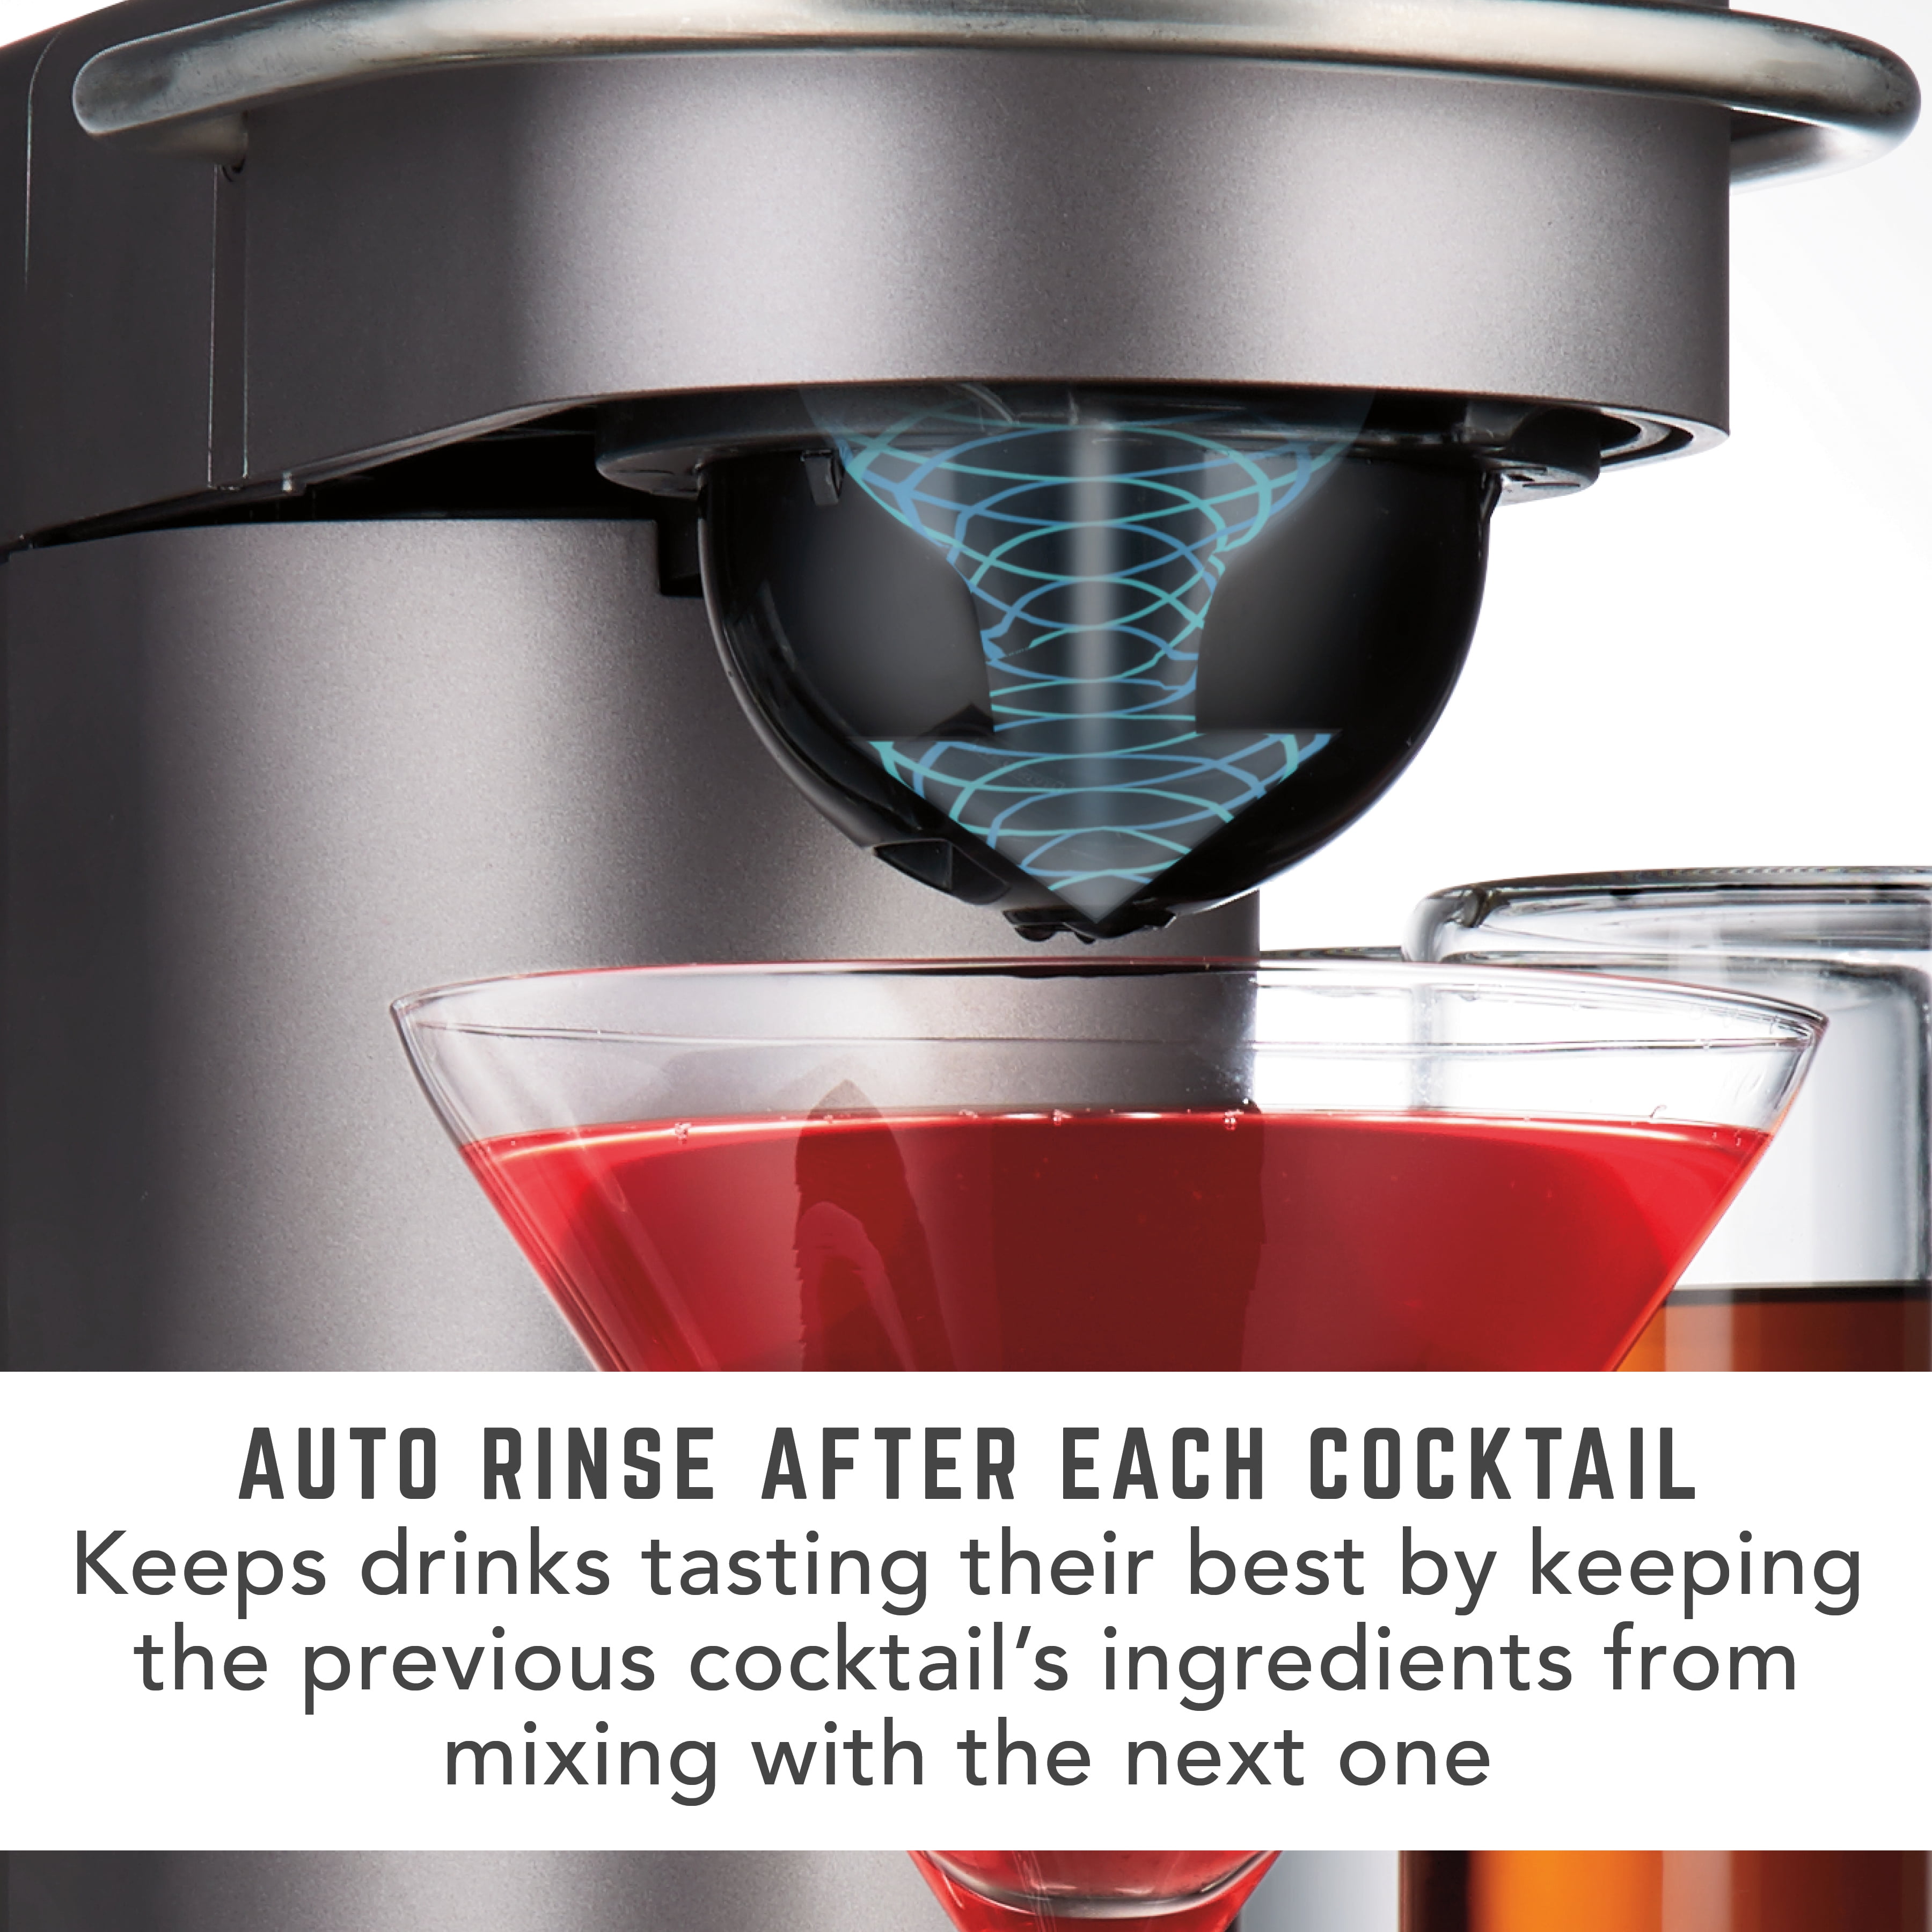 Bartesian cocktail machine to make its way to countertops this year thanks  to Hamilton Beach partnership - CNET